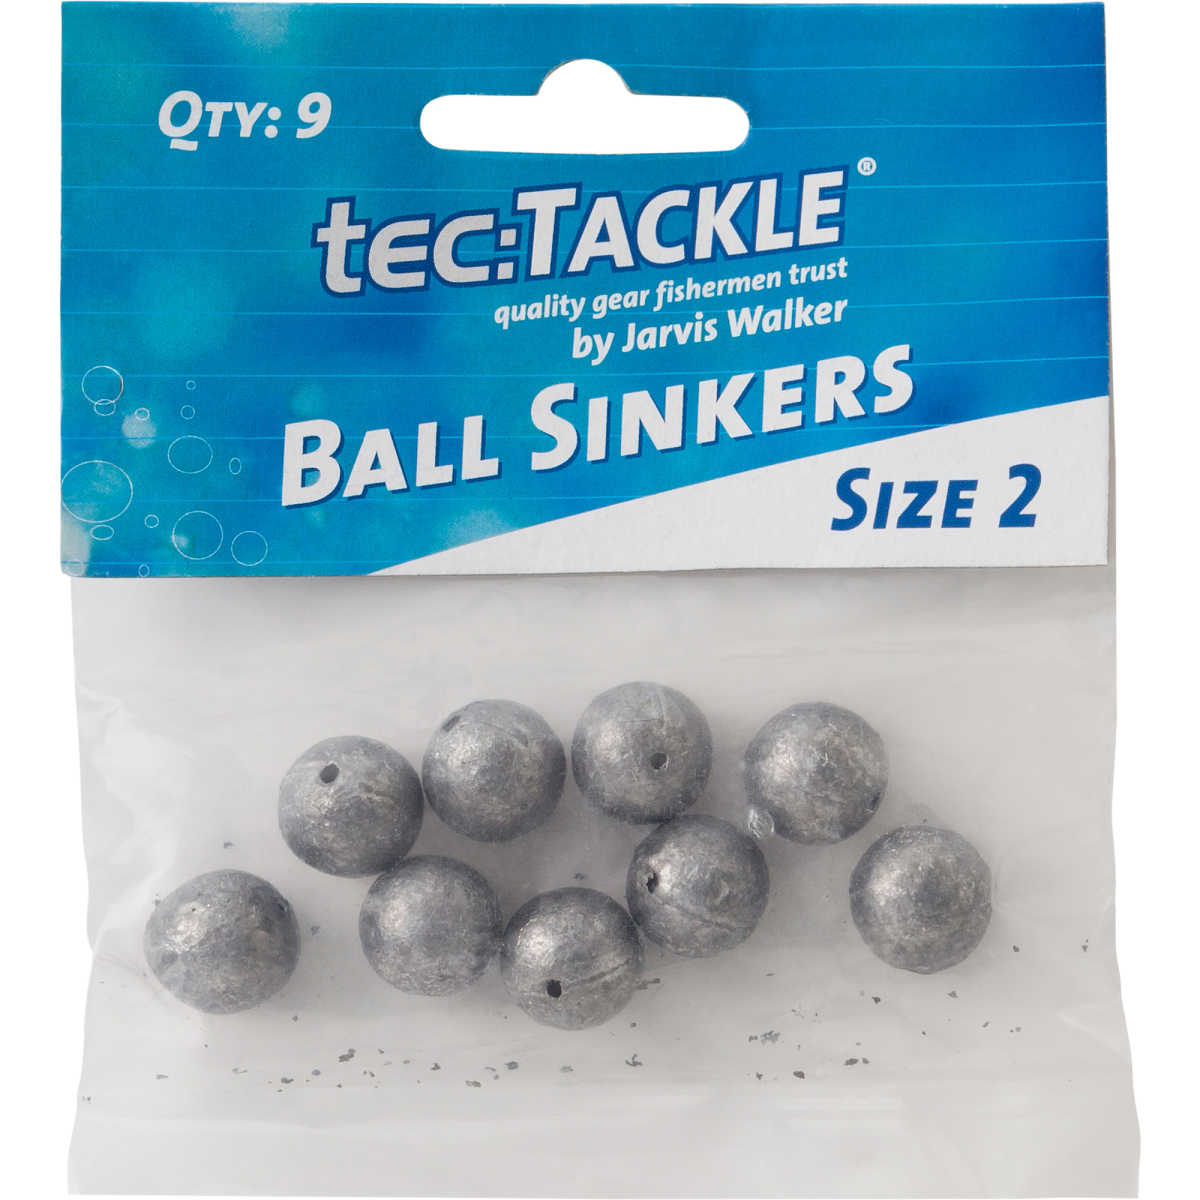 Tec:Tackle Ball Sinker Size 2 Qty 9 -  - Mansfield Hunting & Fishing - Products to prepare for Corona Virus